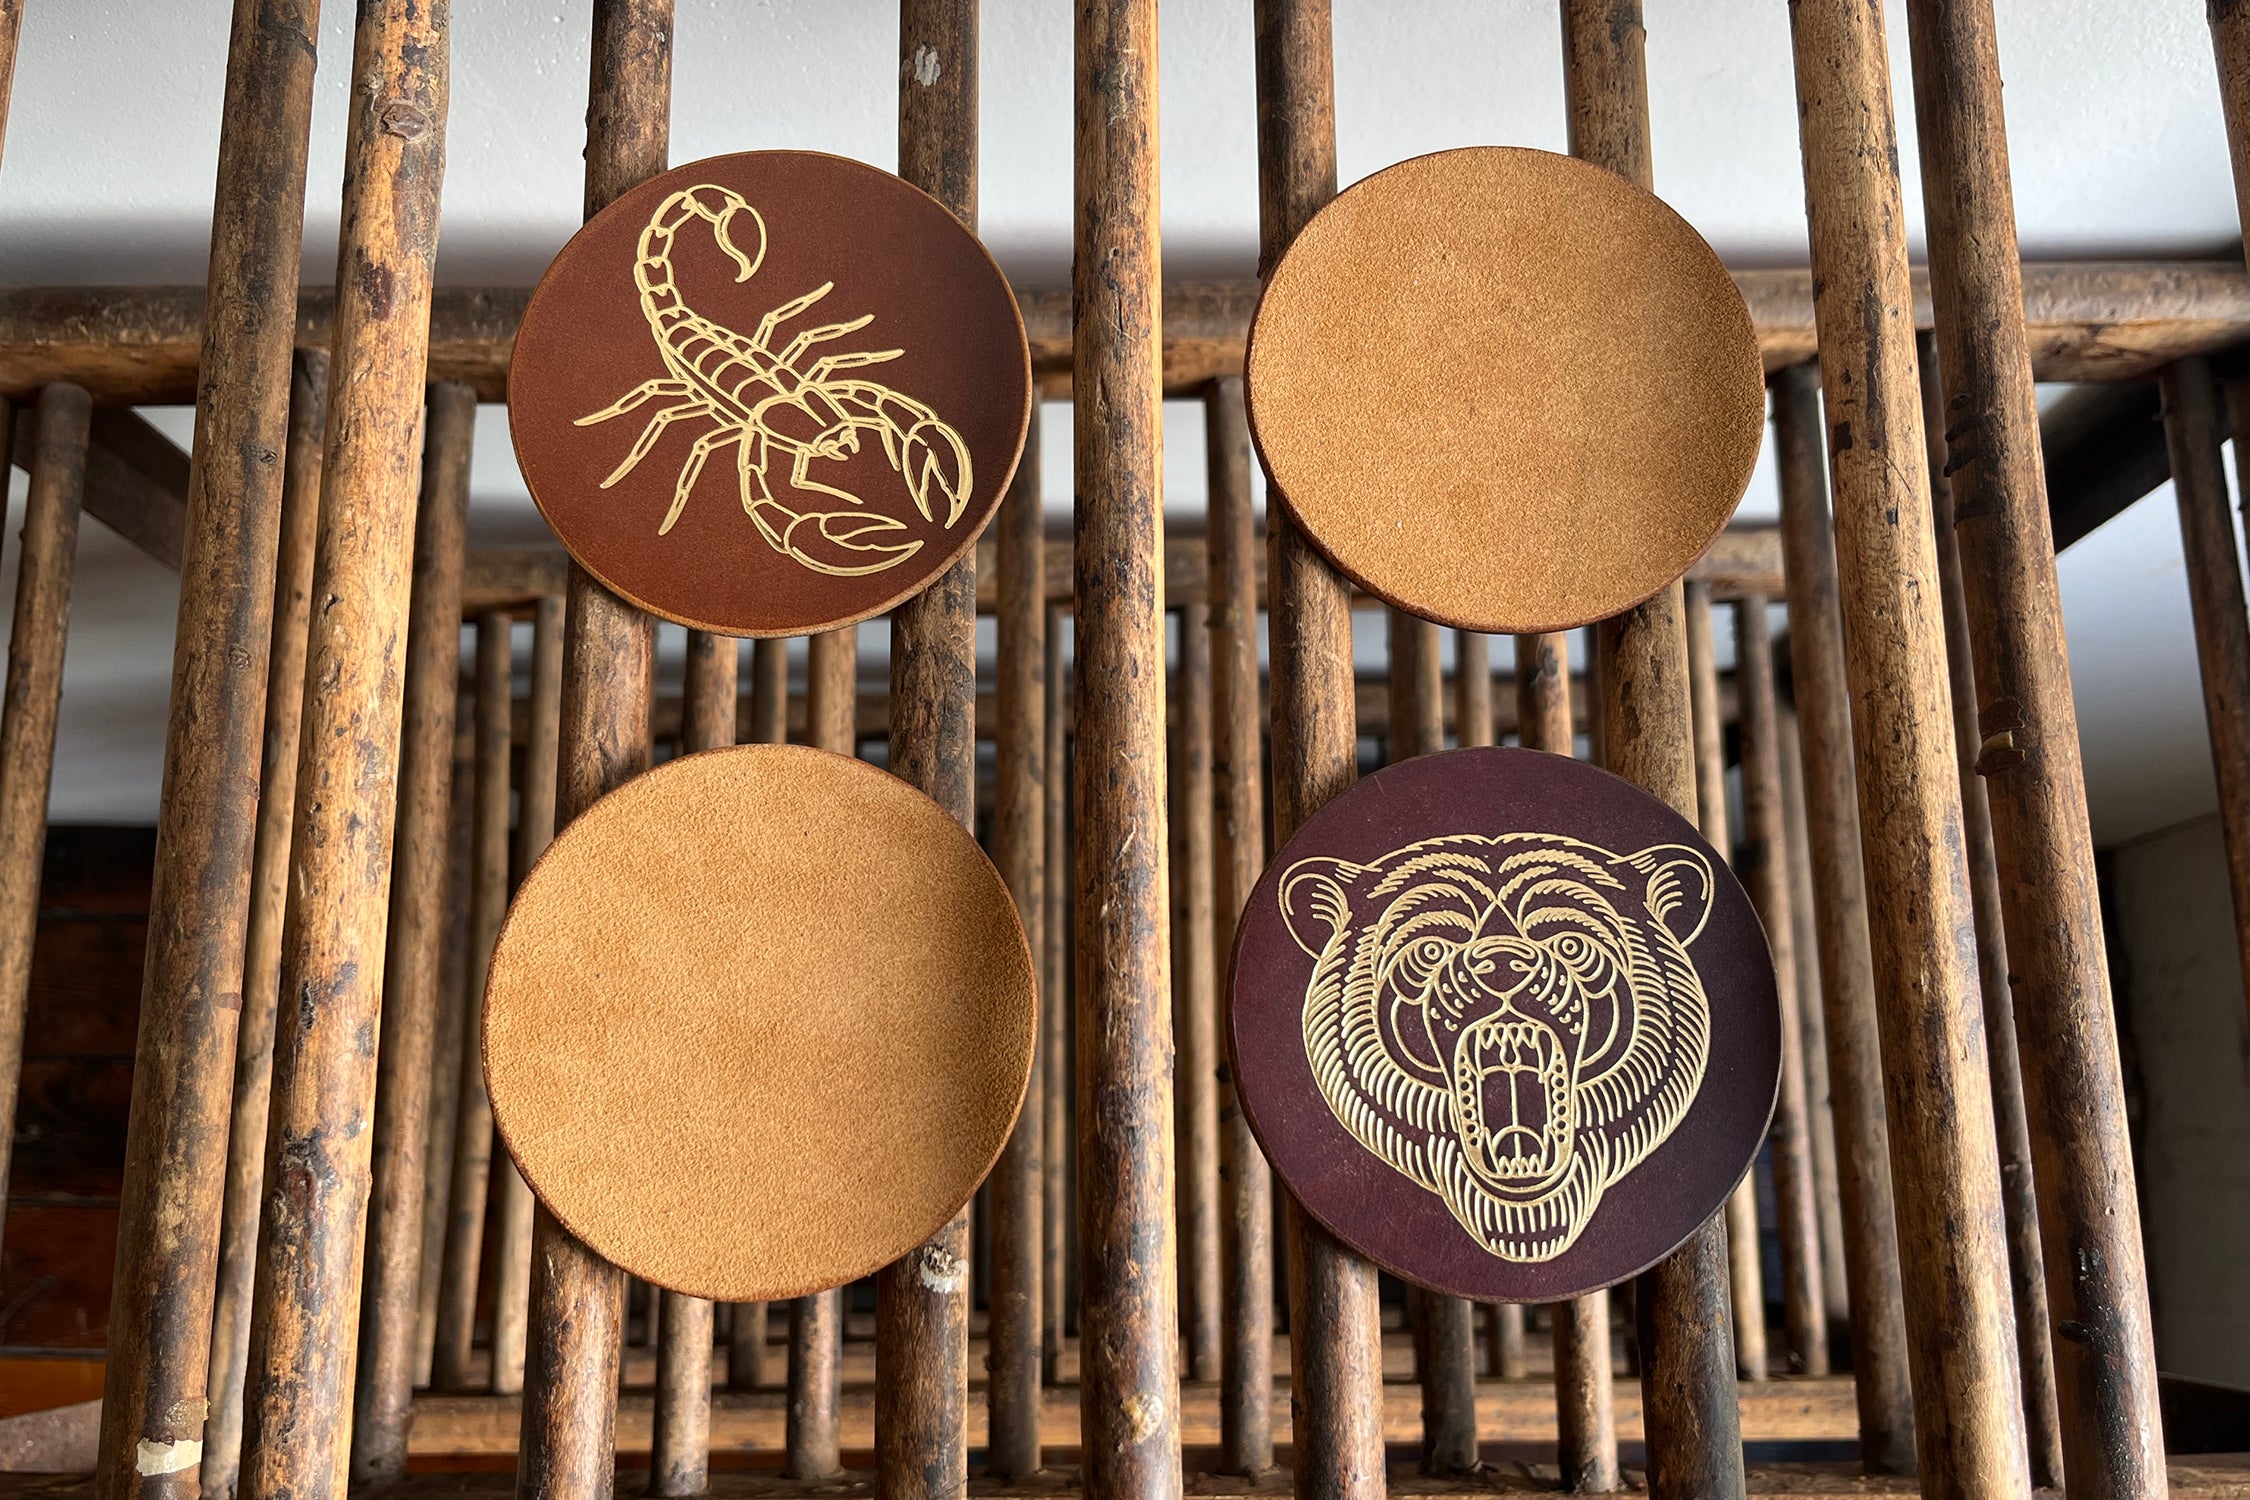 ALL-LEATHER COASTERS - FINAL RUN